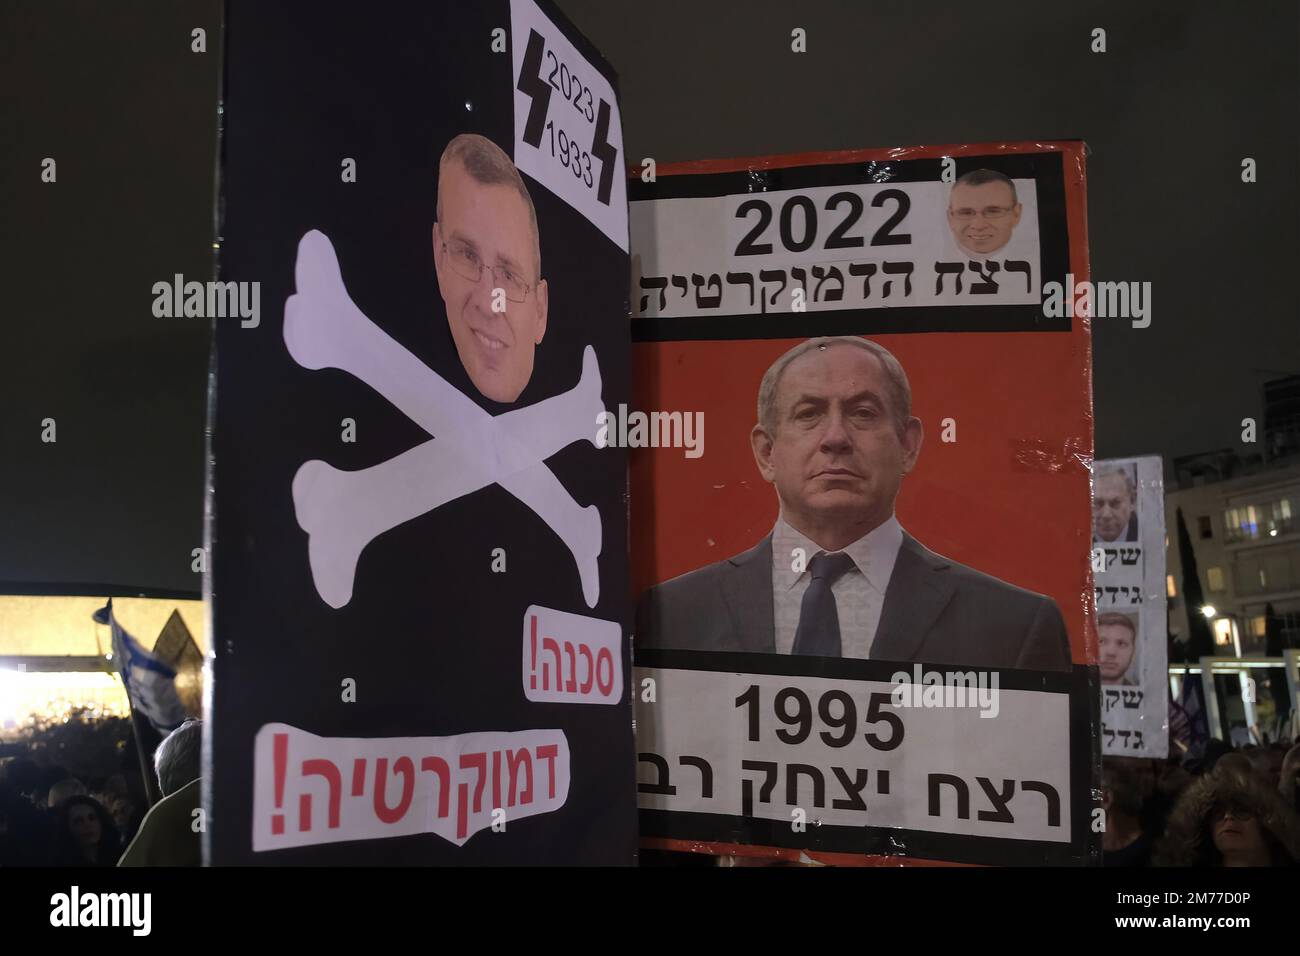 TEL AVIV, ISRAEL - JANUARY 7: A protester holds up a sign which shows Justice Minister Yariv Levin with crossbones a symbol of Nazi Germany during a demonstration against Israel's new government's judicial system plan that aims to weaken the country's Supreme Court on January 7, 2023, in Tel Aviv, Israel. Civil liberties advocates accuse the new government of declaring war against the legal system, saying the proposed plan will put minority rights in imminent danger and will endanger the country's democracy. Credit: Eddie Gerald/Alamy Live News Stock Photo